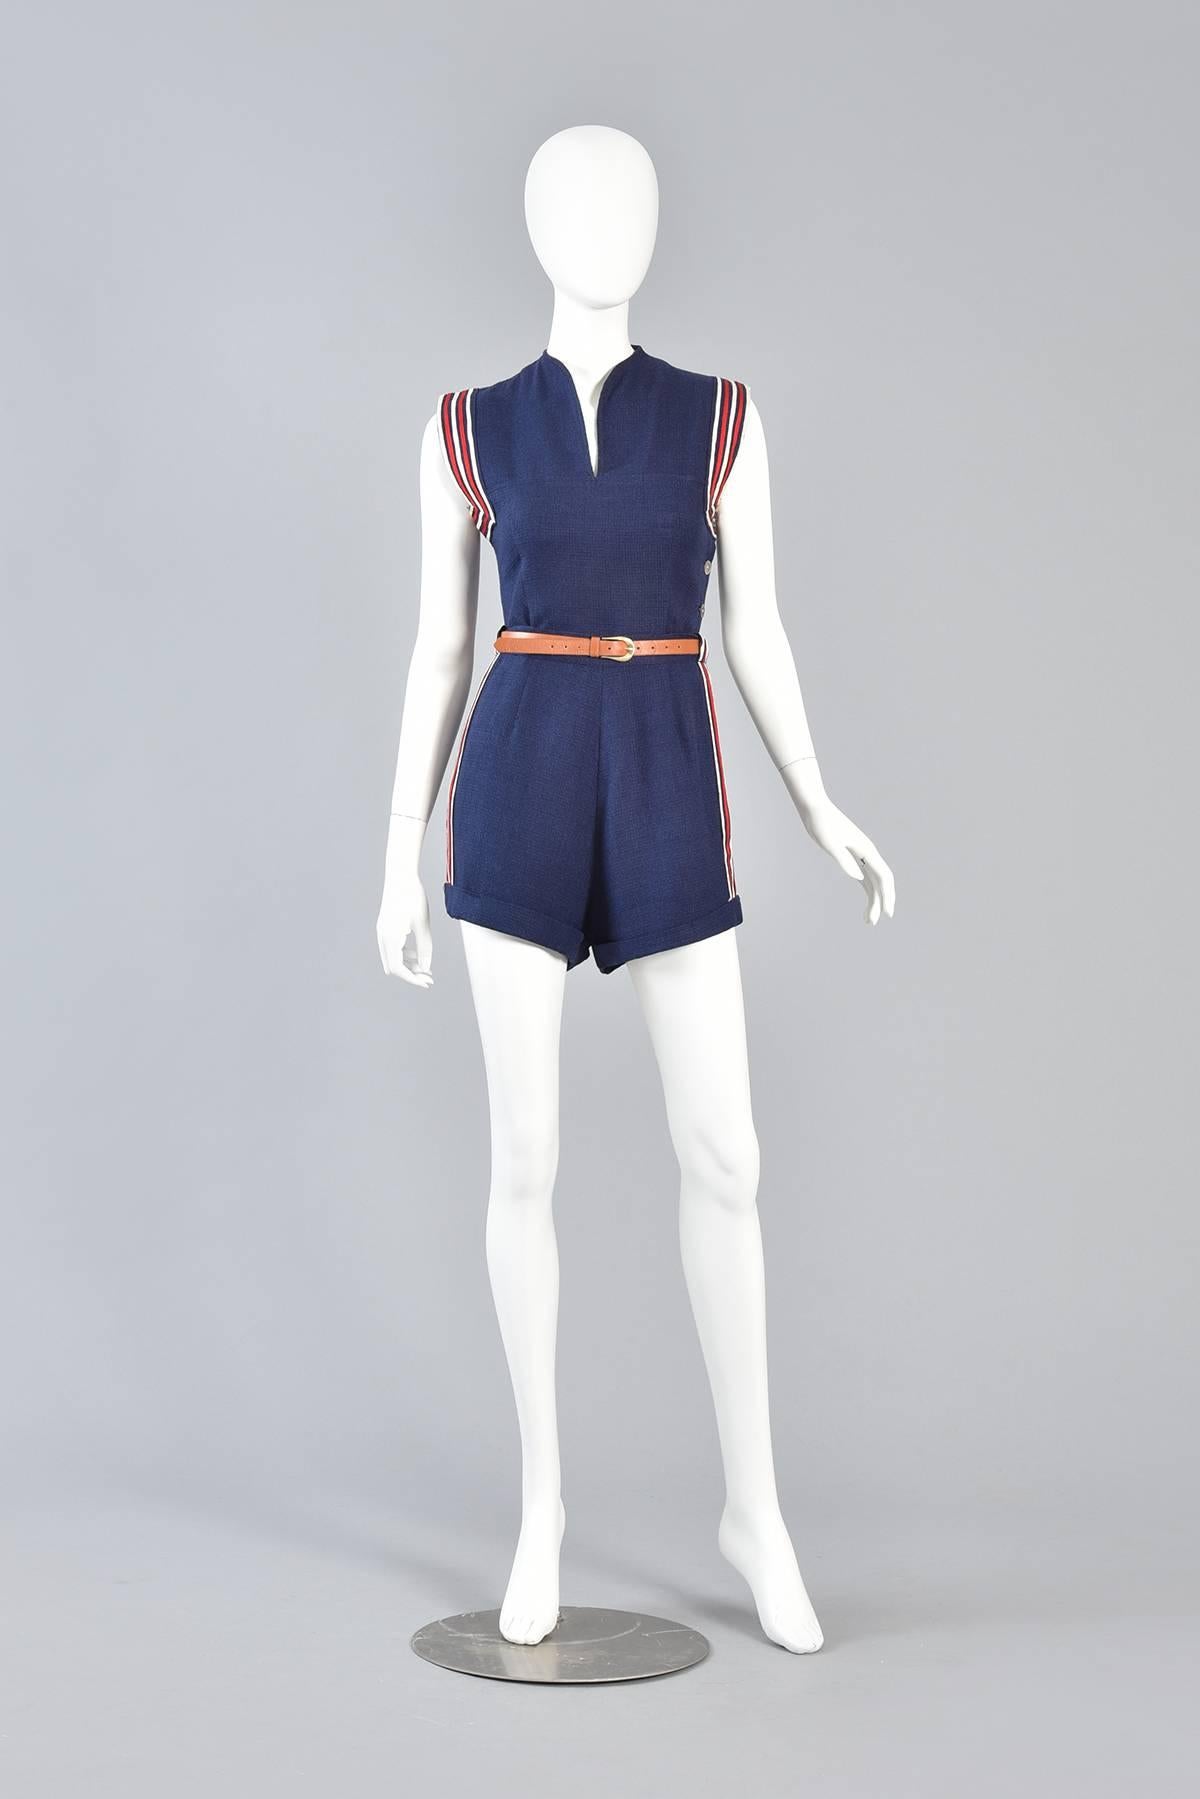 1940s Red White & Blue Button Up Playsuit

Bustown Modern is so happy to offer this super adorable 1940s navy blue 2 piece playsuit. Set consists of small fitted top and classic high waisted cuffed shorts. 

Fitted woven top with notched